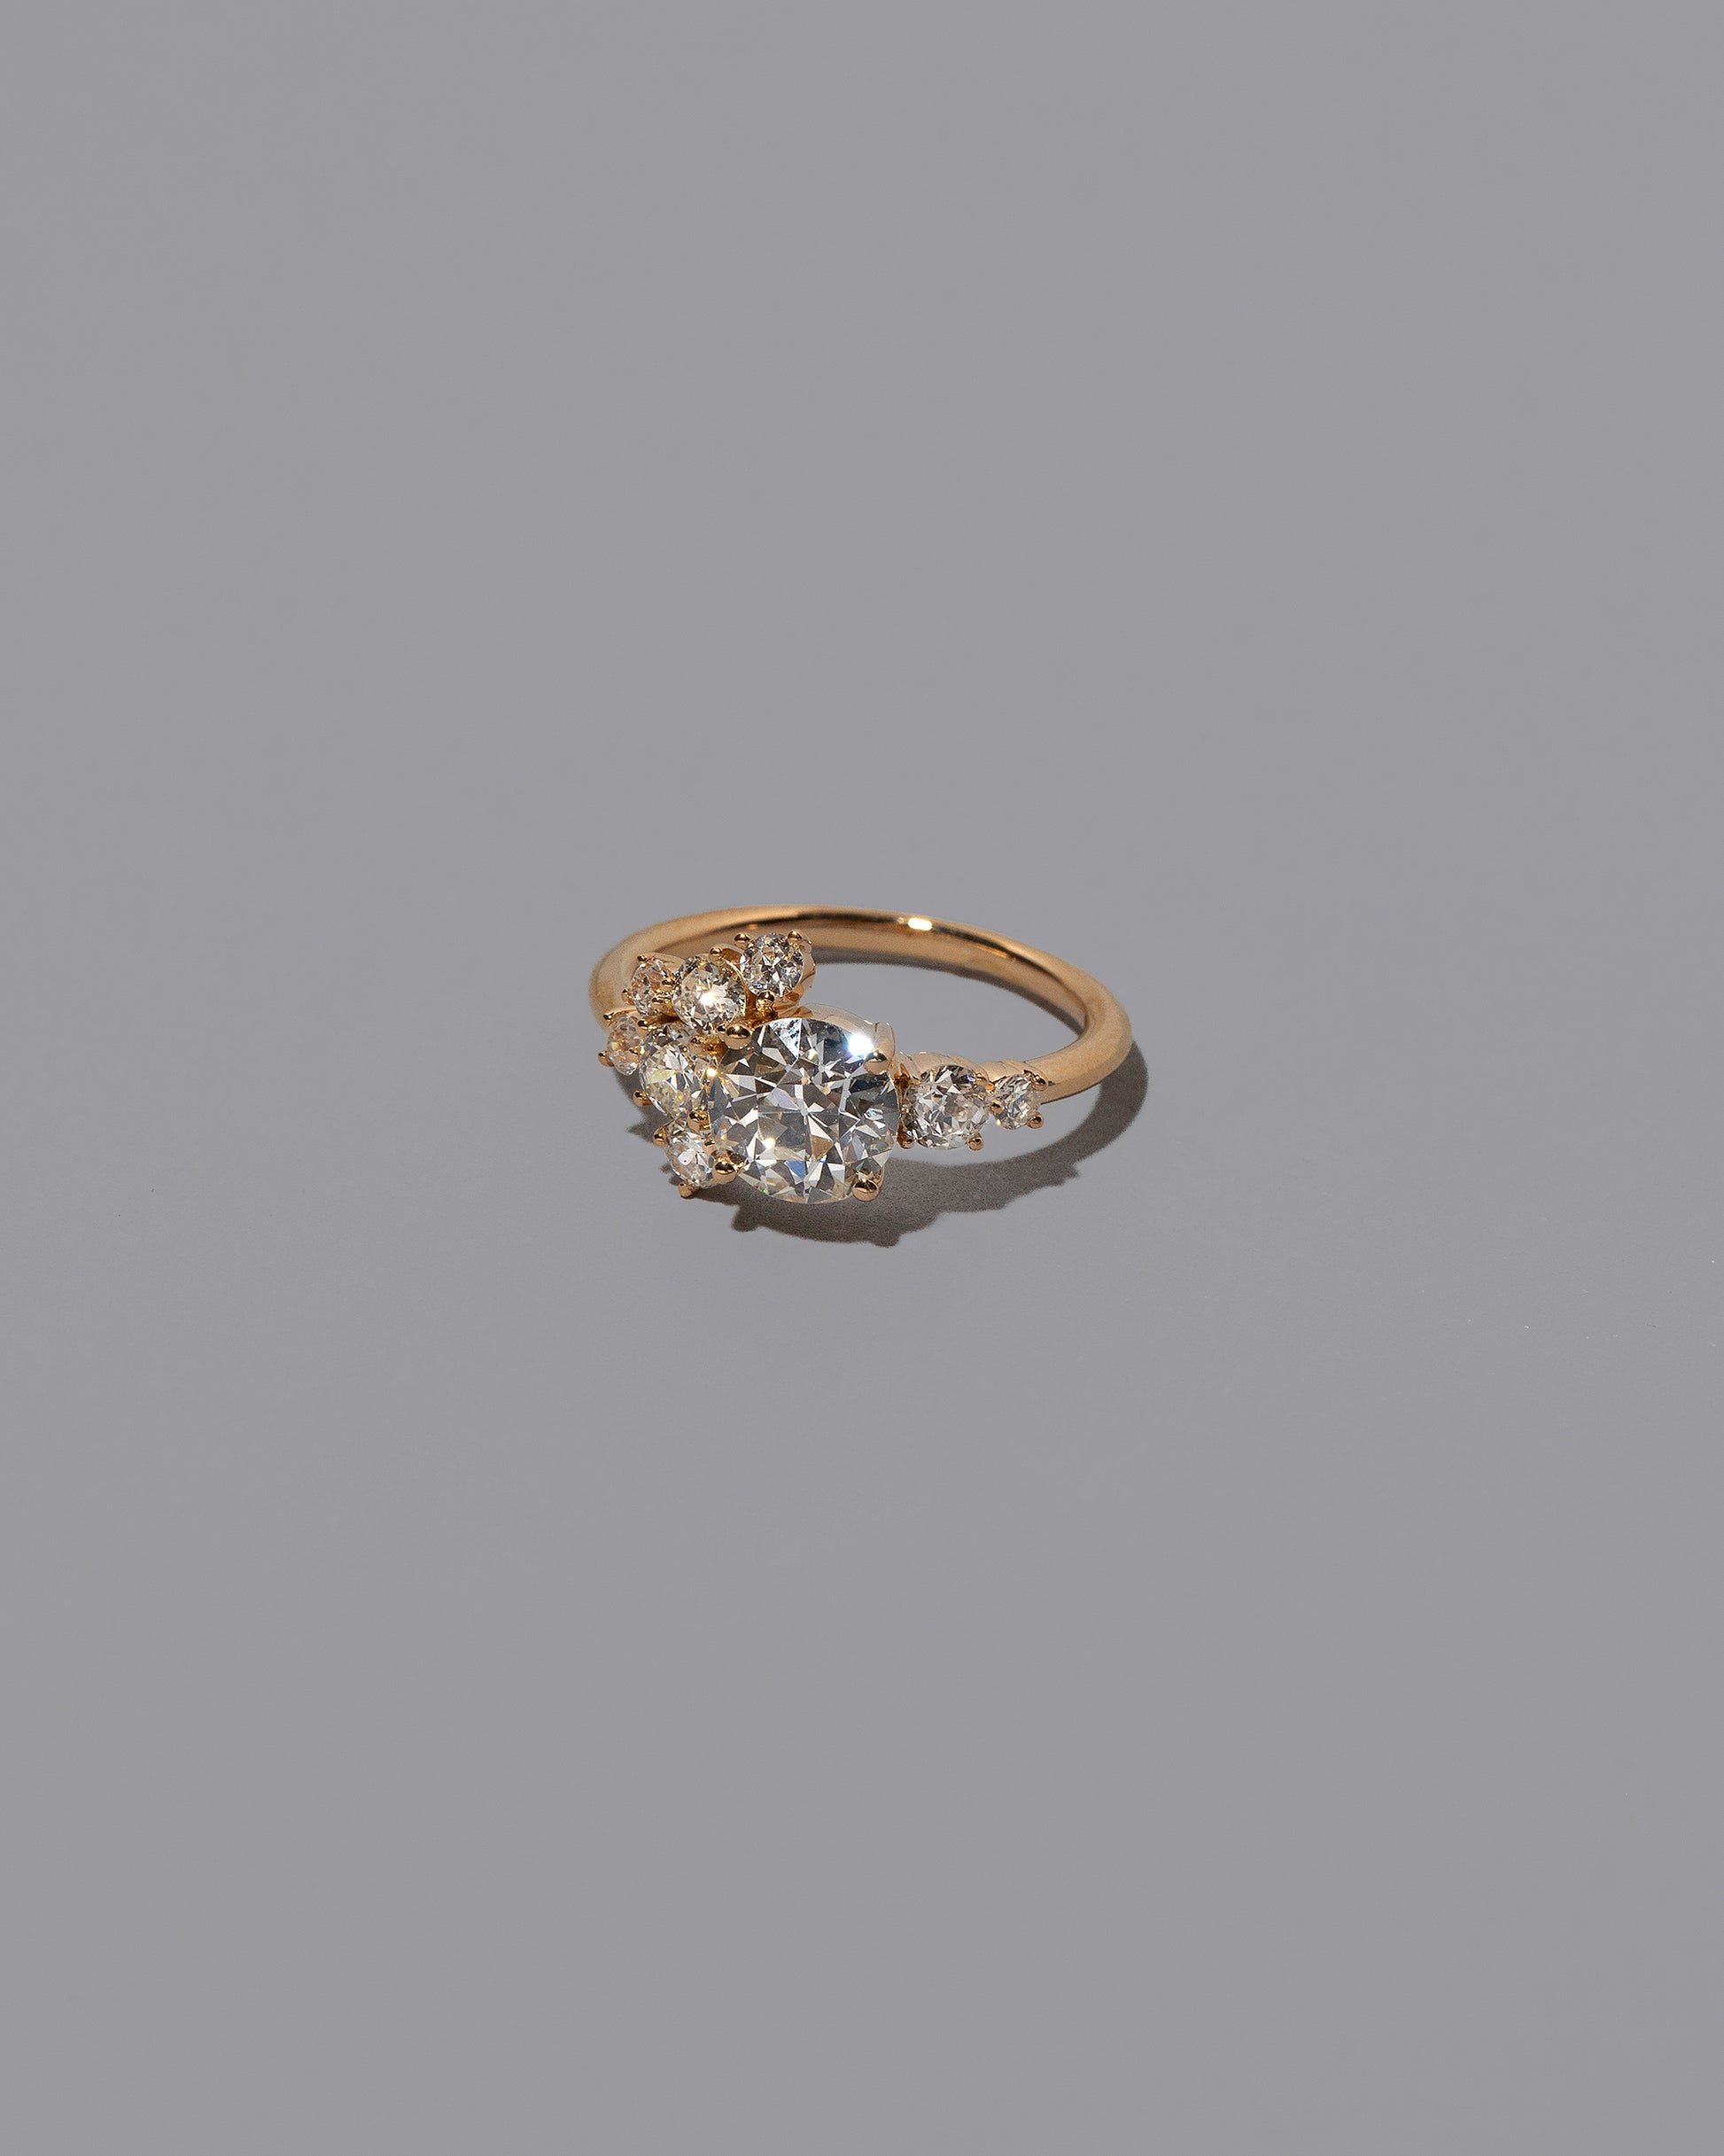 View from the side of the Grand White Diamond Vega Ring on grey color background.